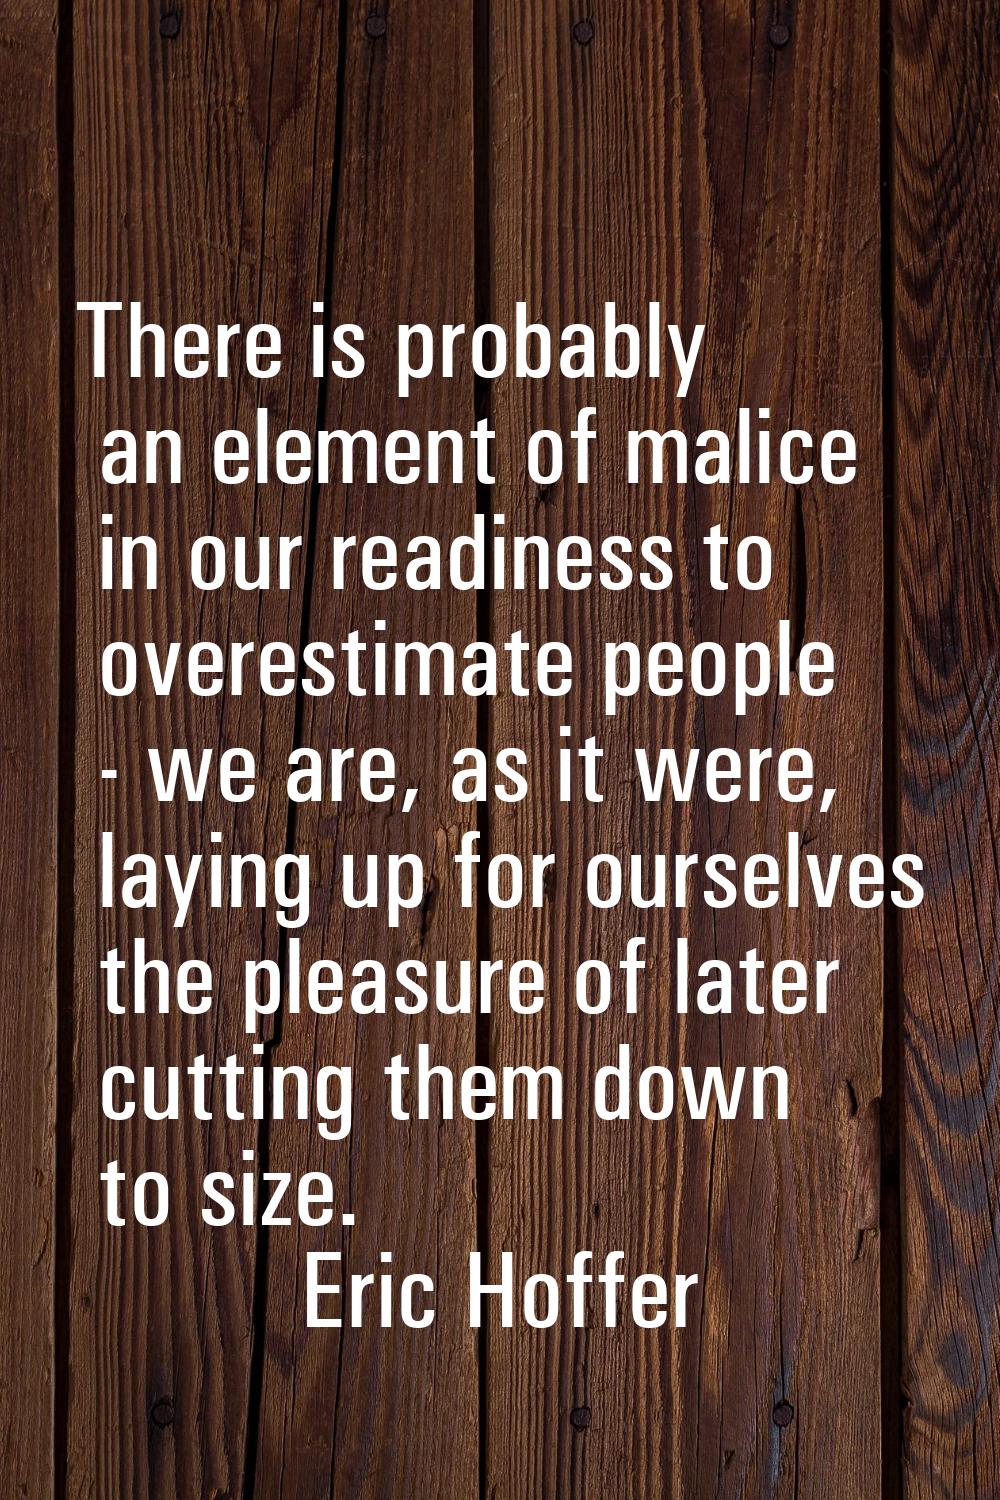 There is probably an element of malice in our readiness to overestimate people - we are, as it were